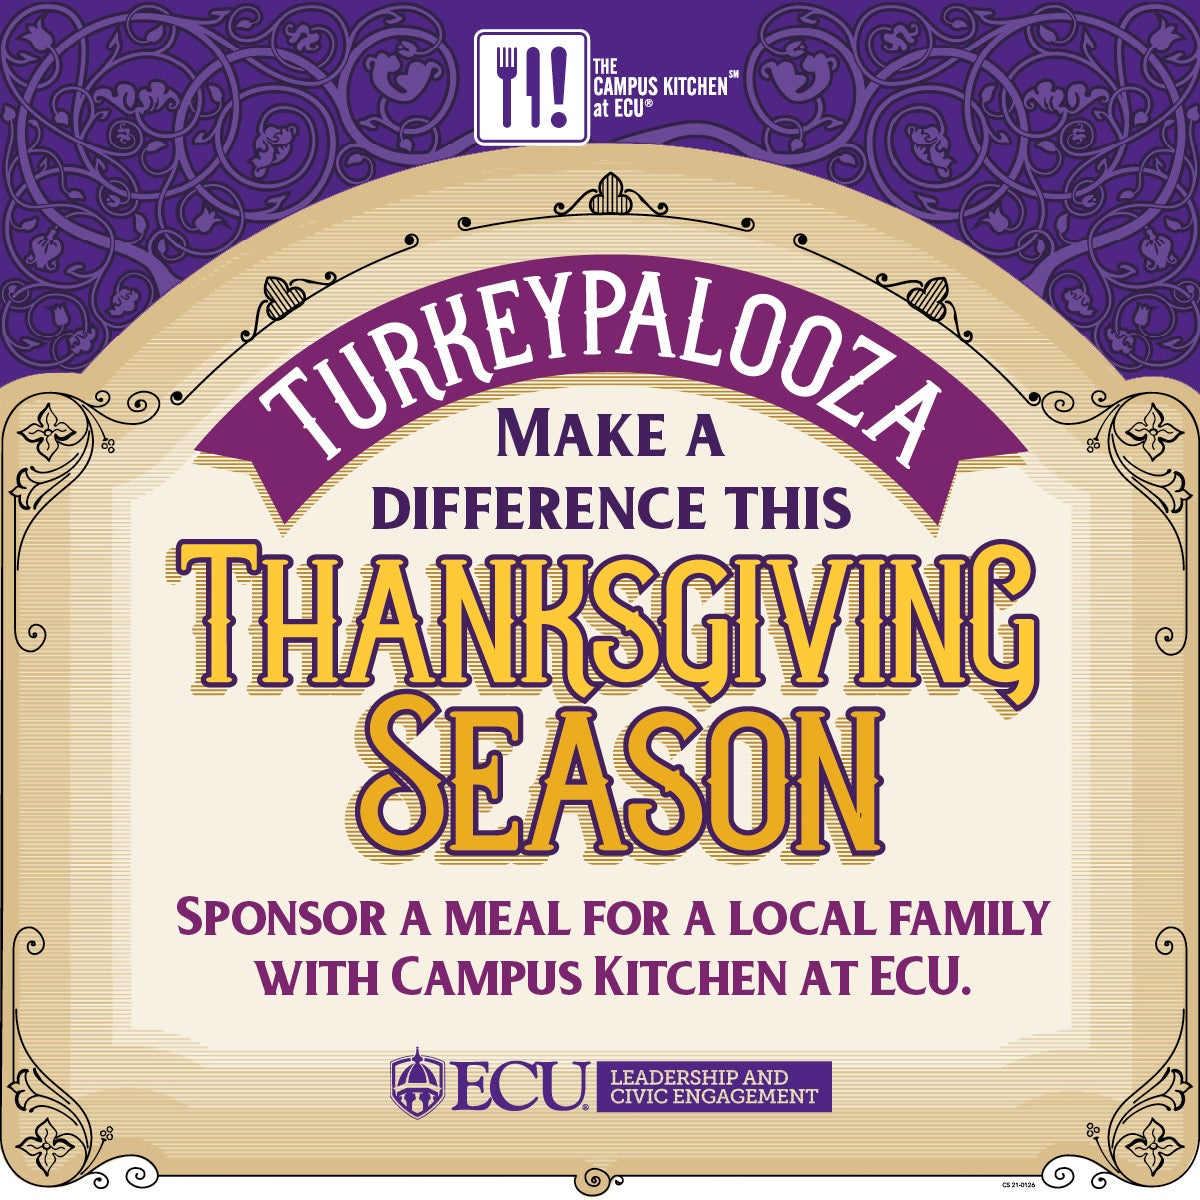 Turkeypalooza: Make a difference this Thanksgiving season. Sponsor a meal for a local family with Campus Kitchen at ECU.